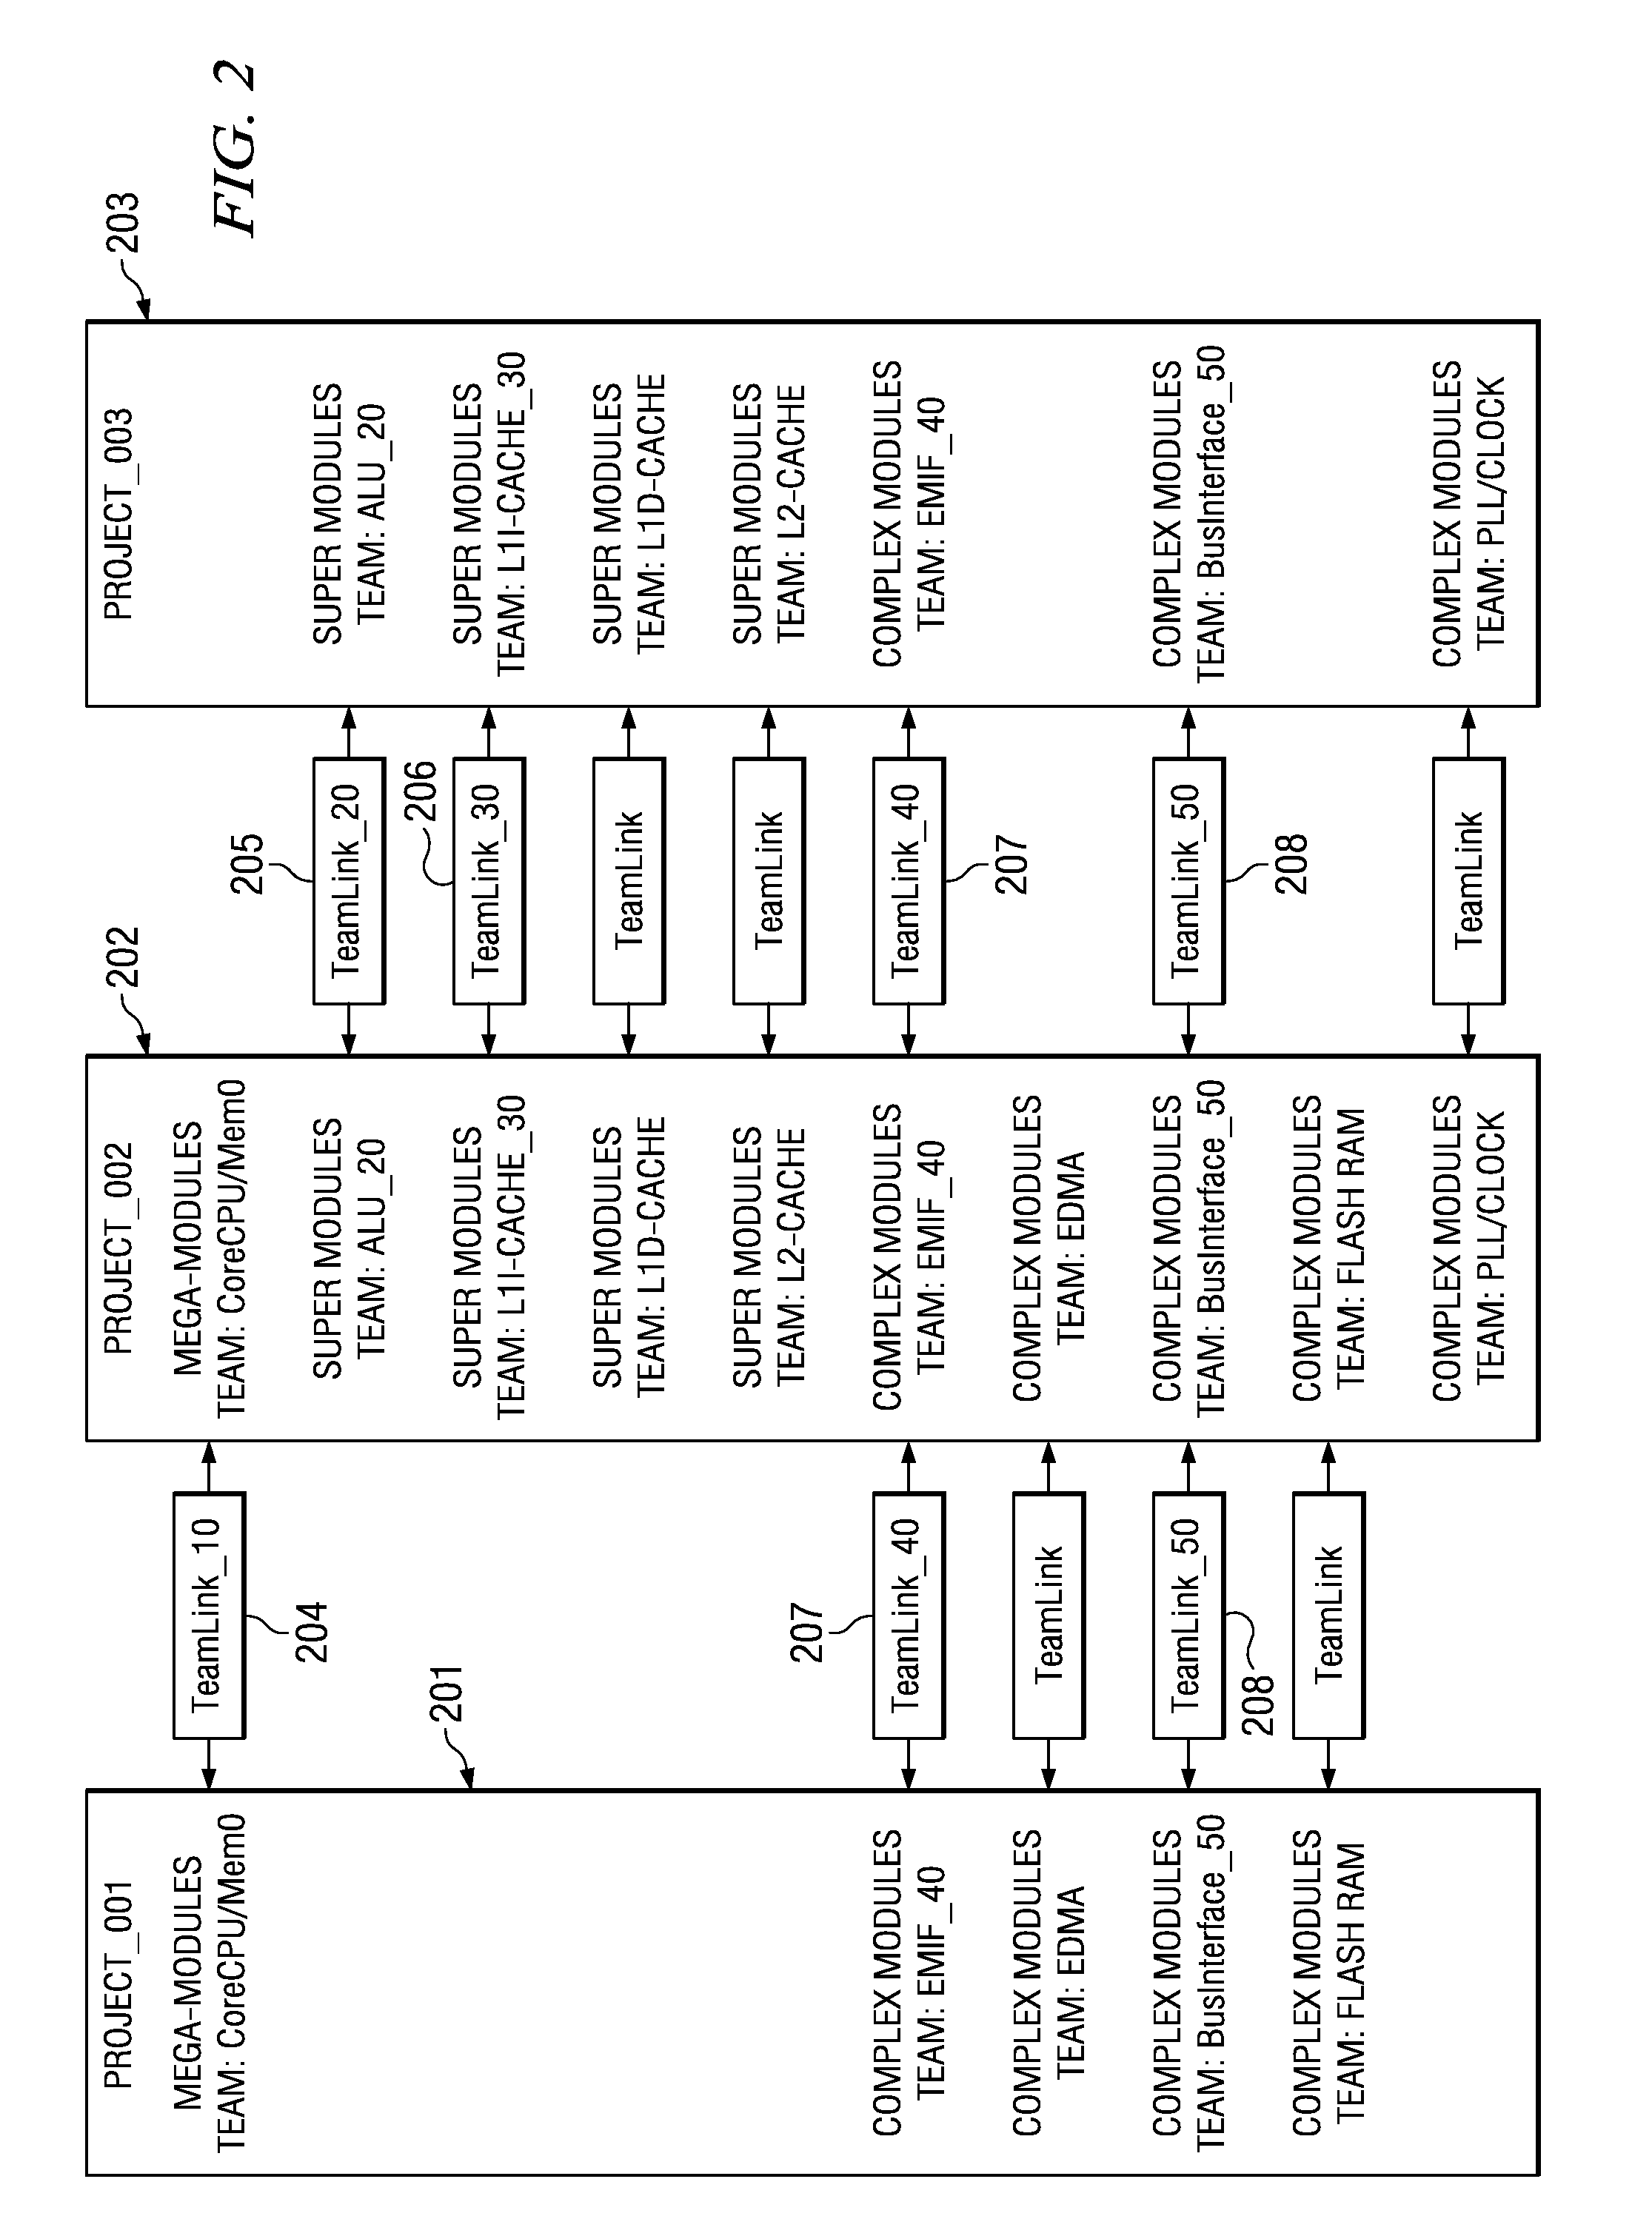 Method for collaboration of issue-resolution by different projects in a processor design